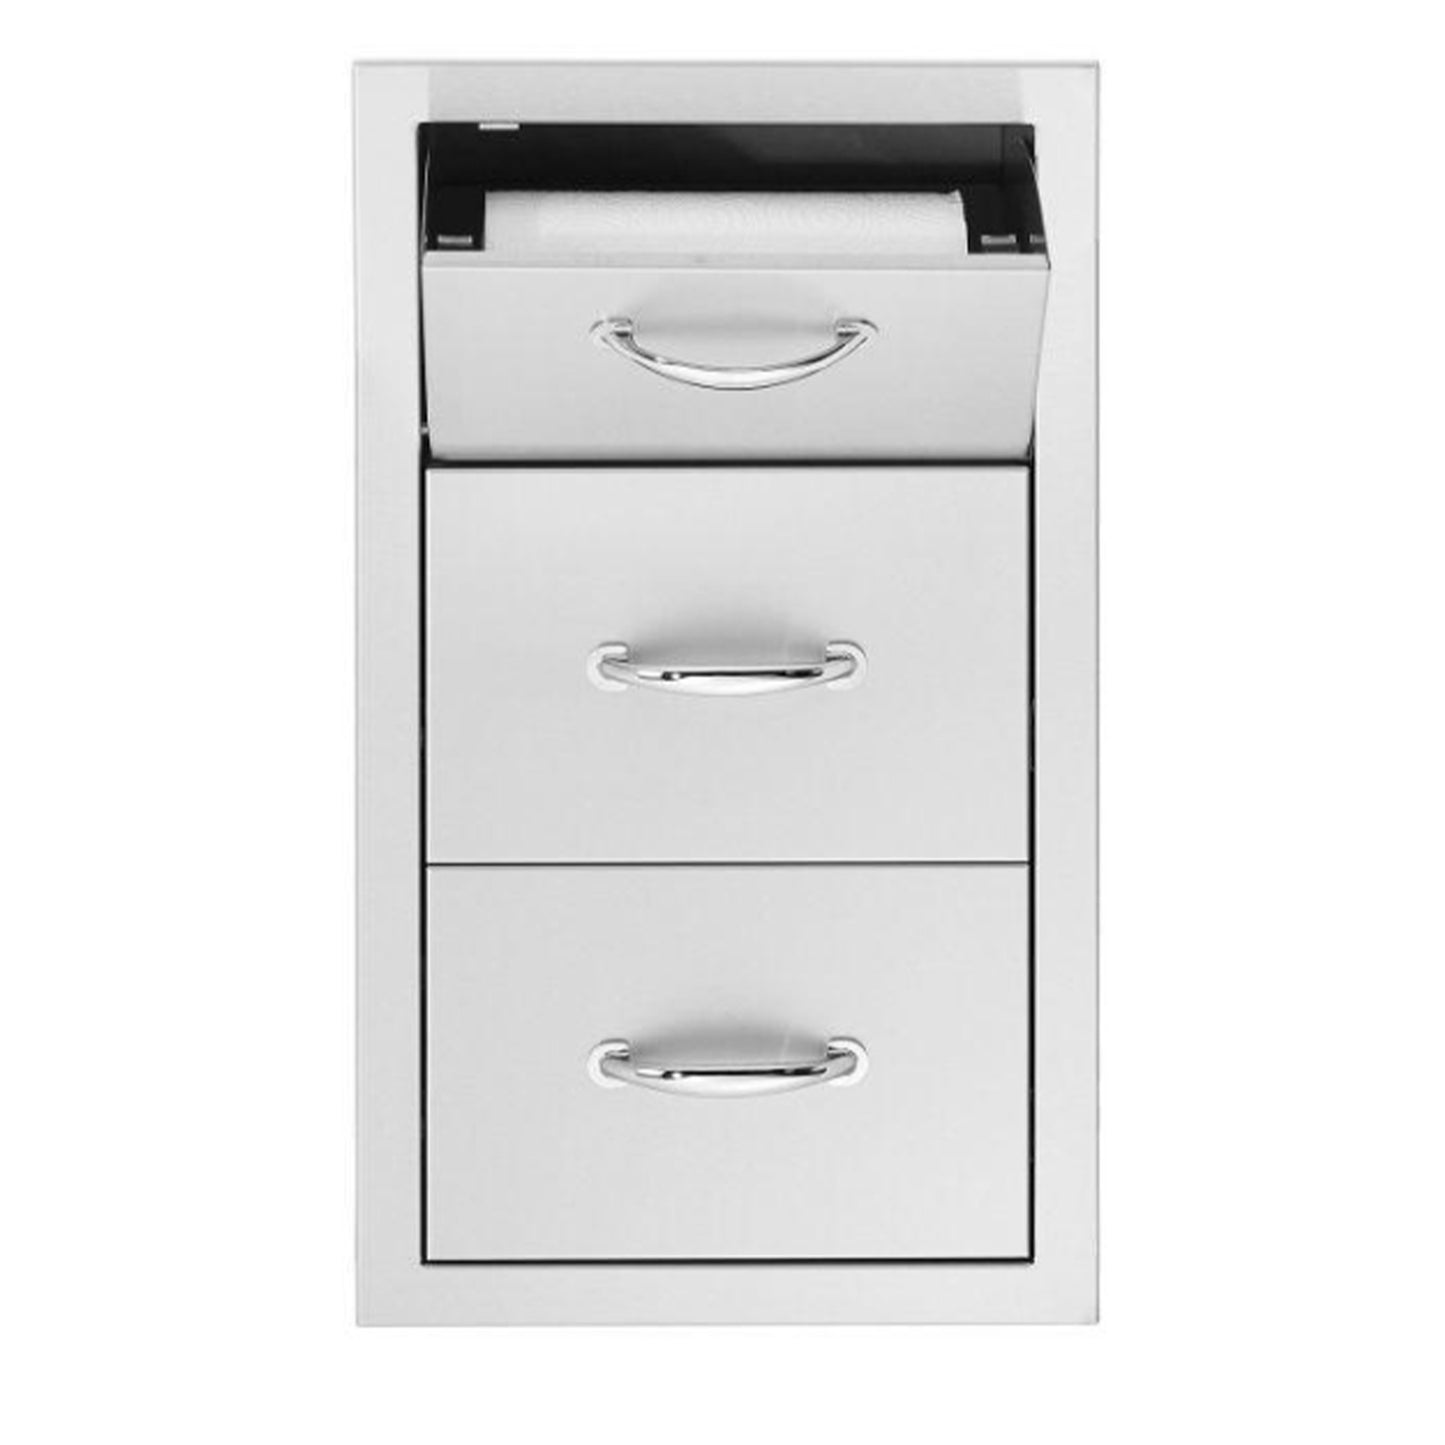 Summerset 15-Inch Steel Masonry Double Access Drawer With Paper Towel Holder